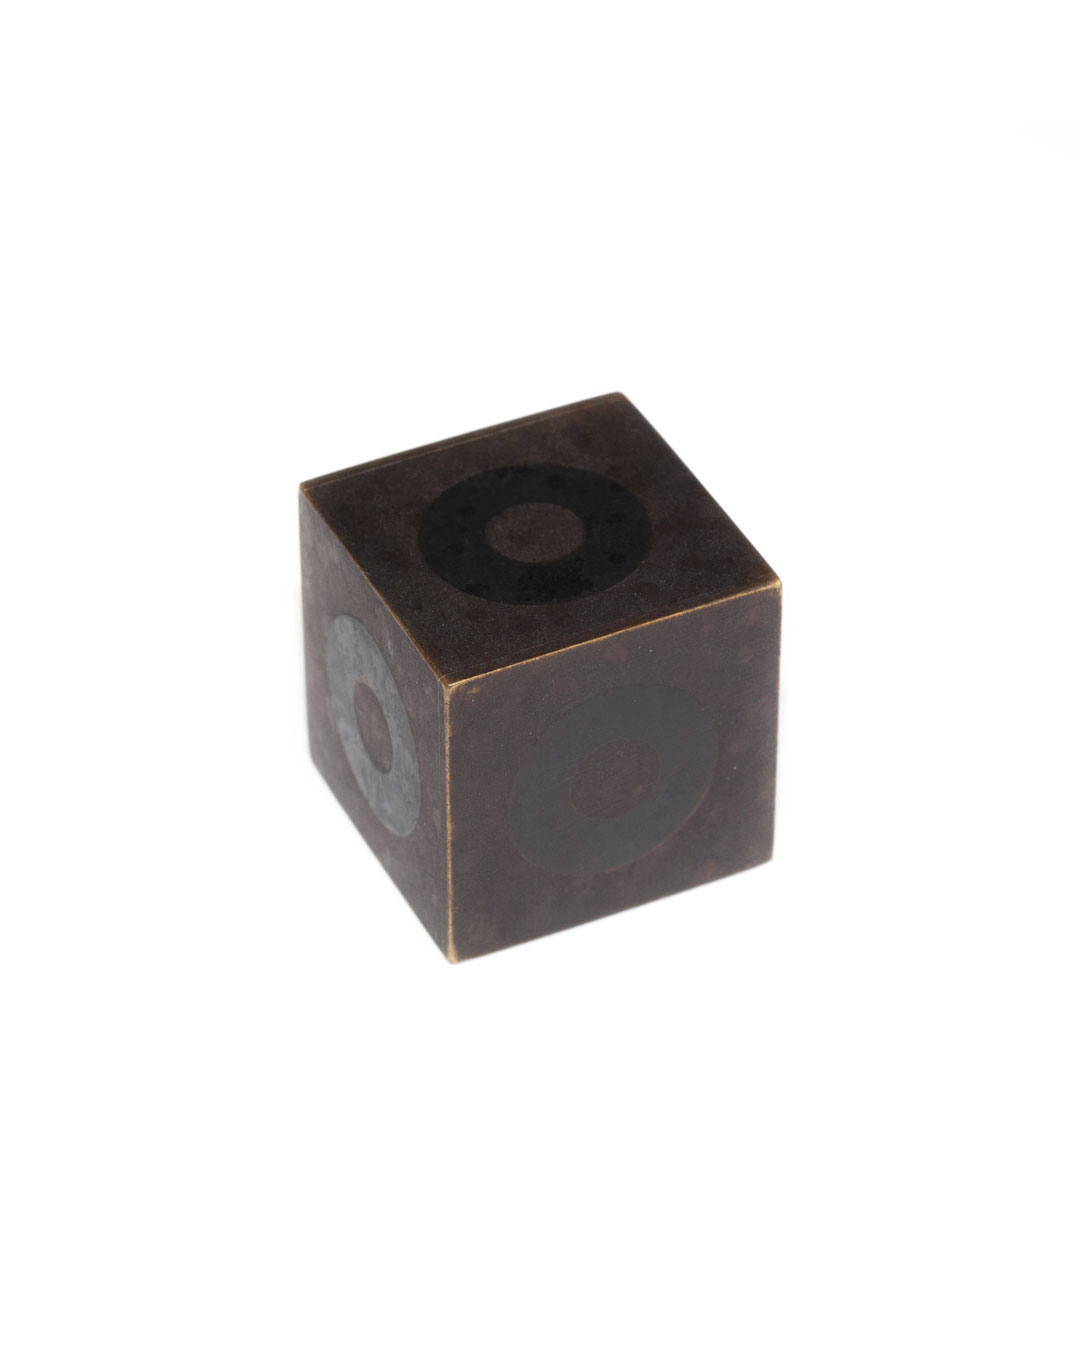 Tore Svensson, Cube, 2008, brooch; etched steel, partly gilt or silver-plated, 20 x 20 x 20 mm, €425